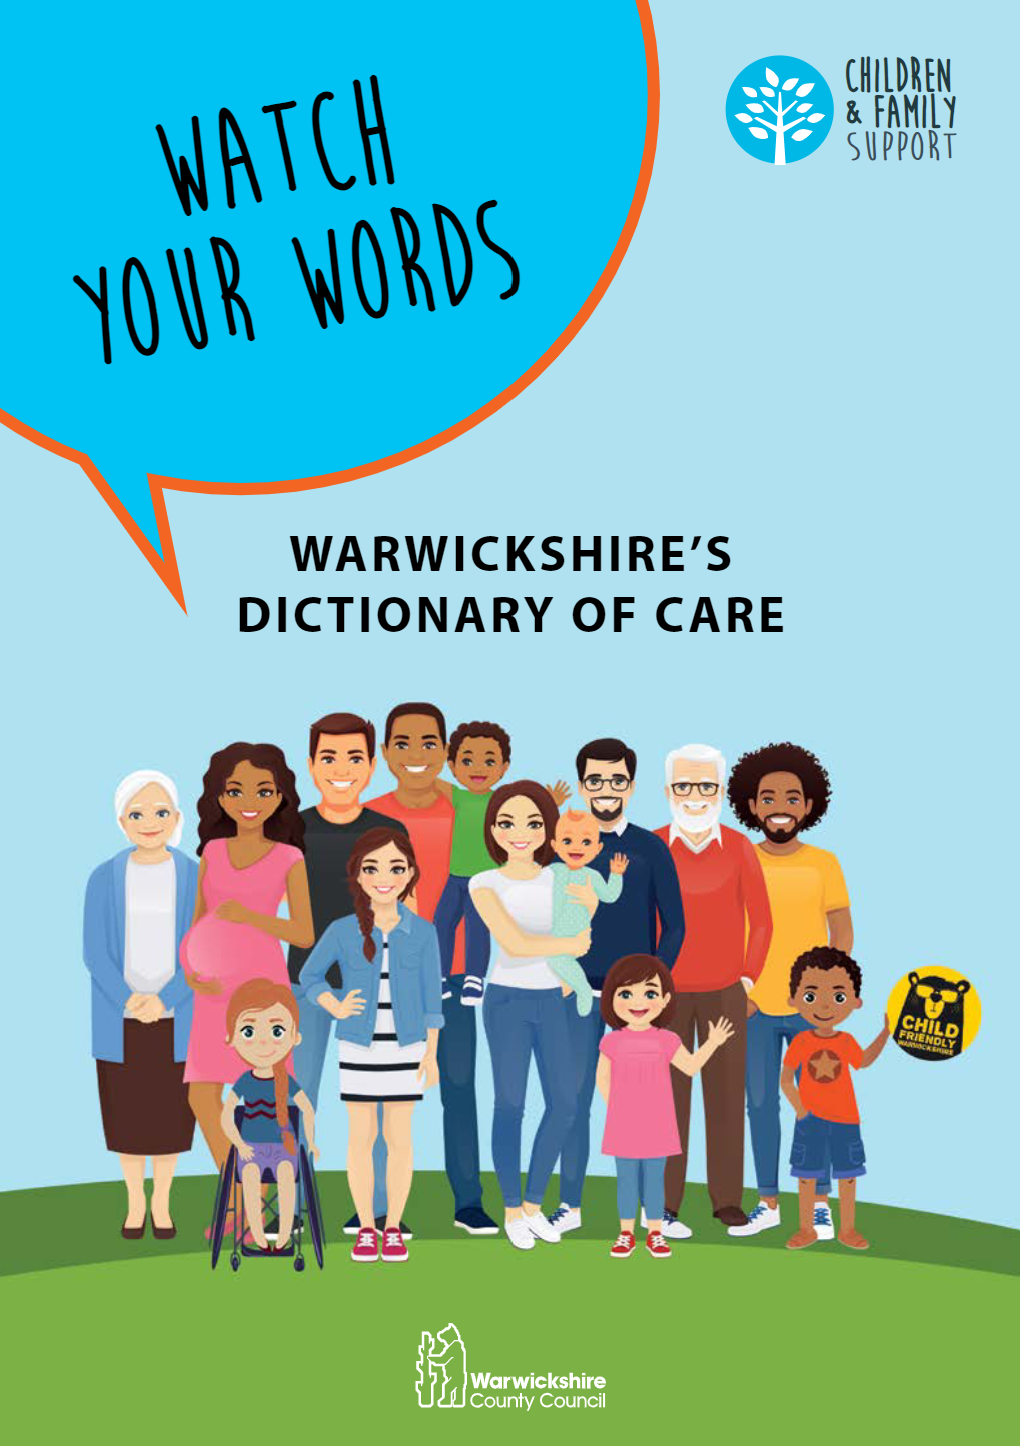 Watch Your Words title in a speech bubble - featuring the Children and Family Support logo, and the words Warwickshire's Dictionary of Care. There is a blue background and various cartoon characters, one holding the CFW logo.